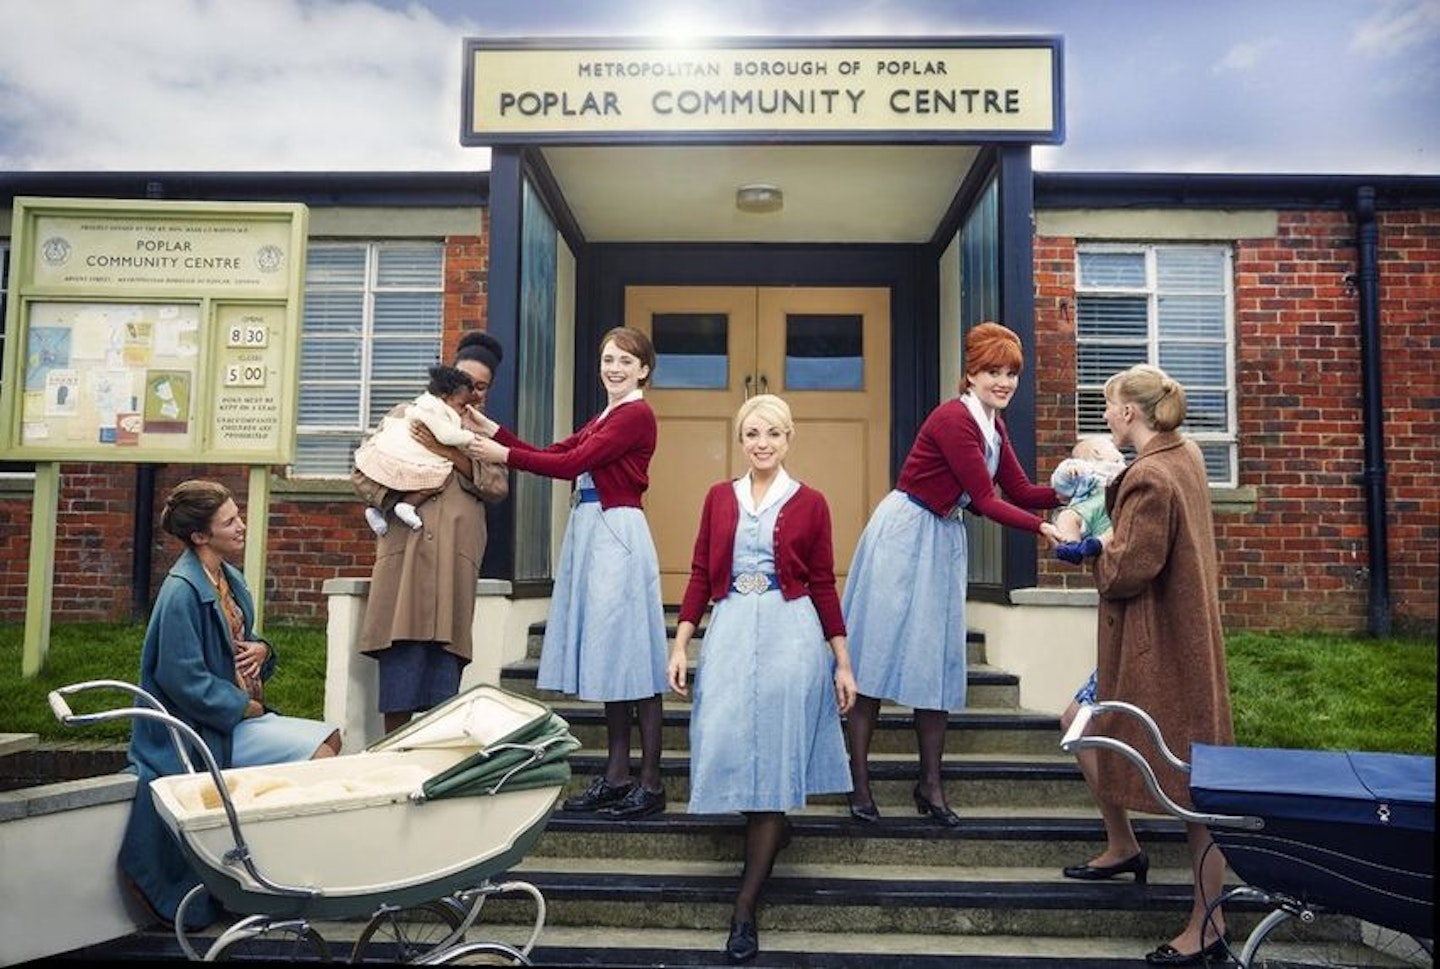 Call the Midwife cast